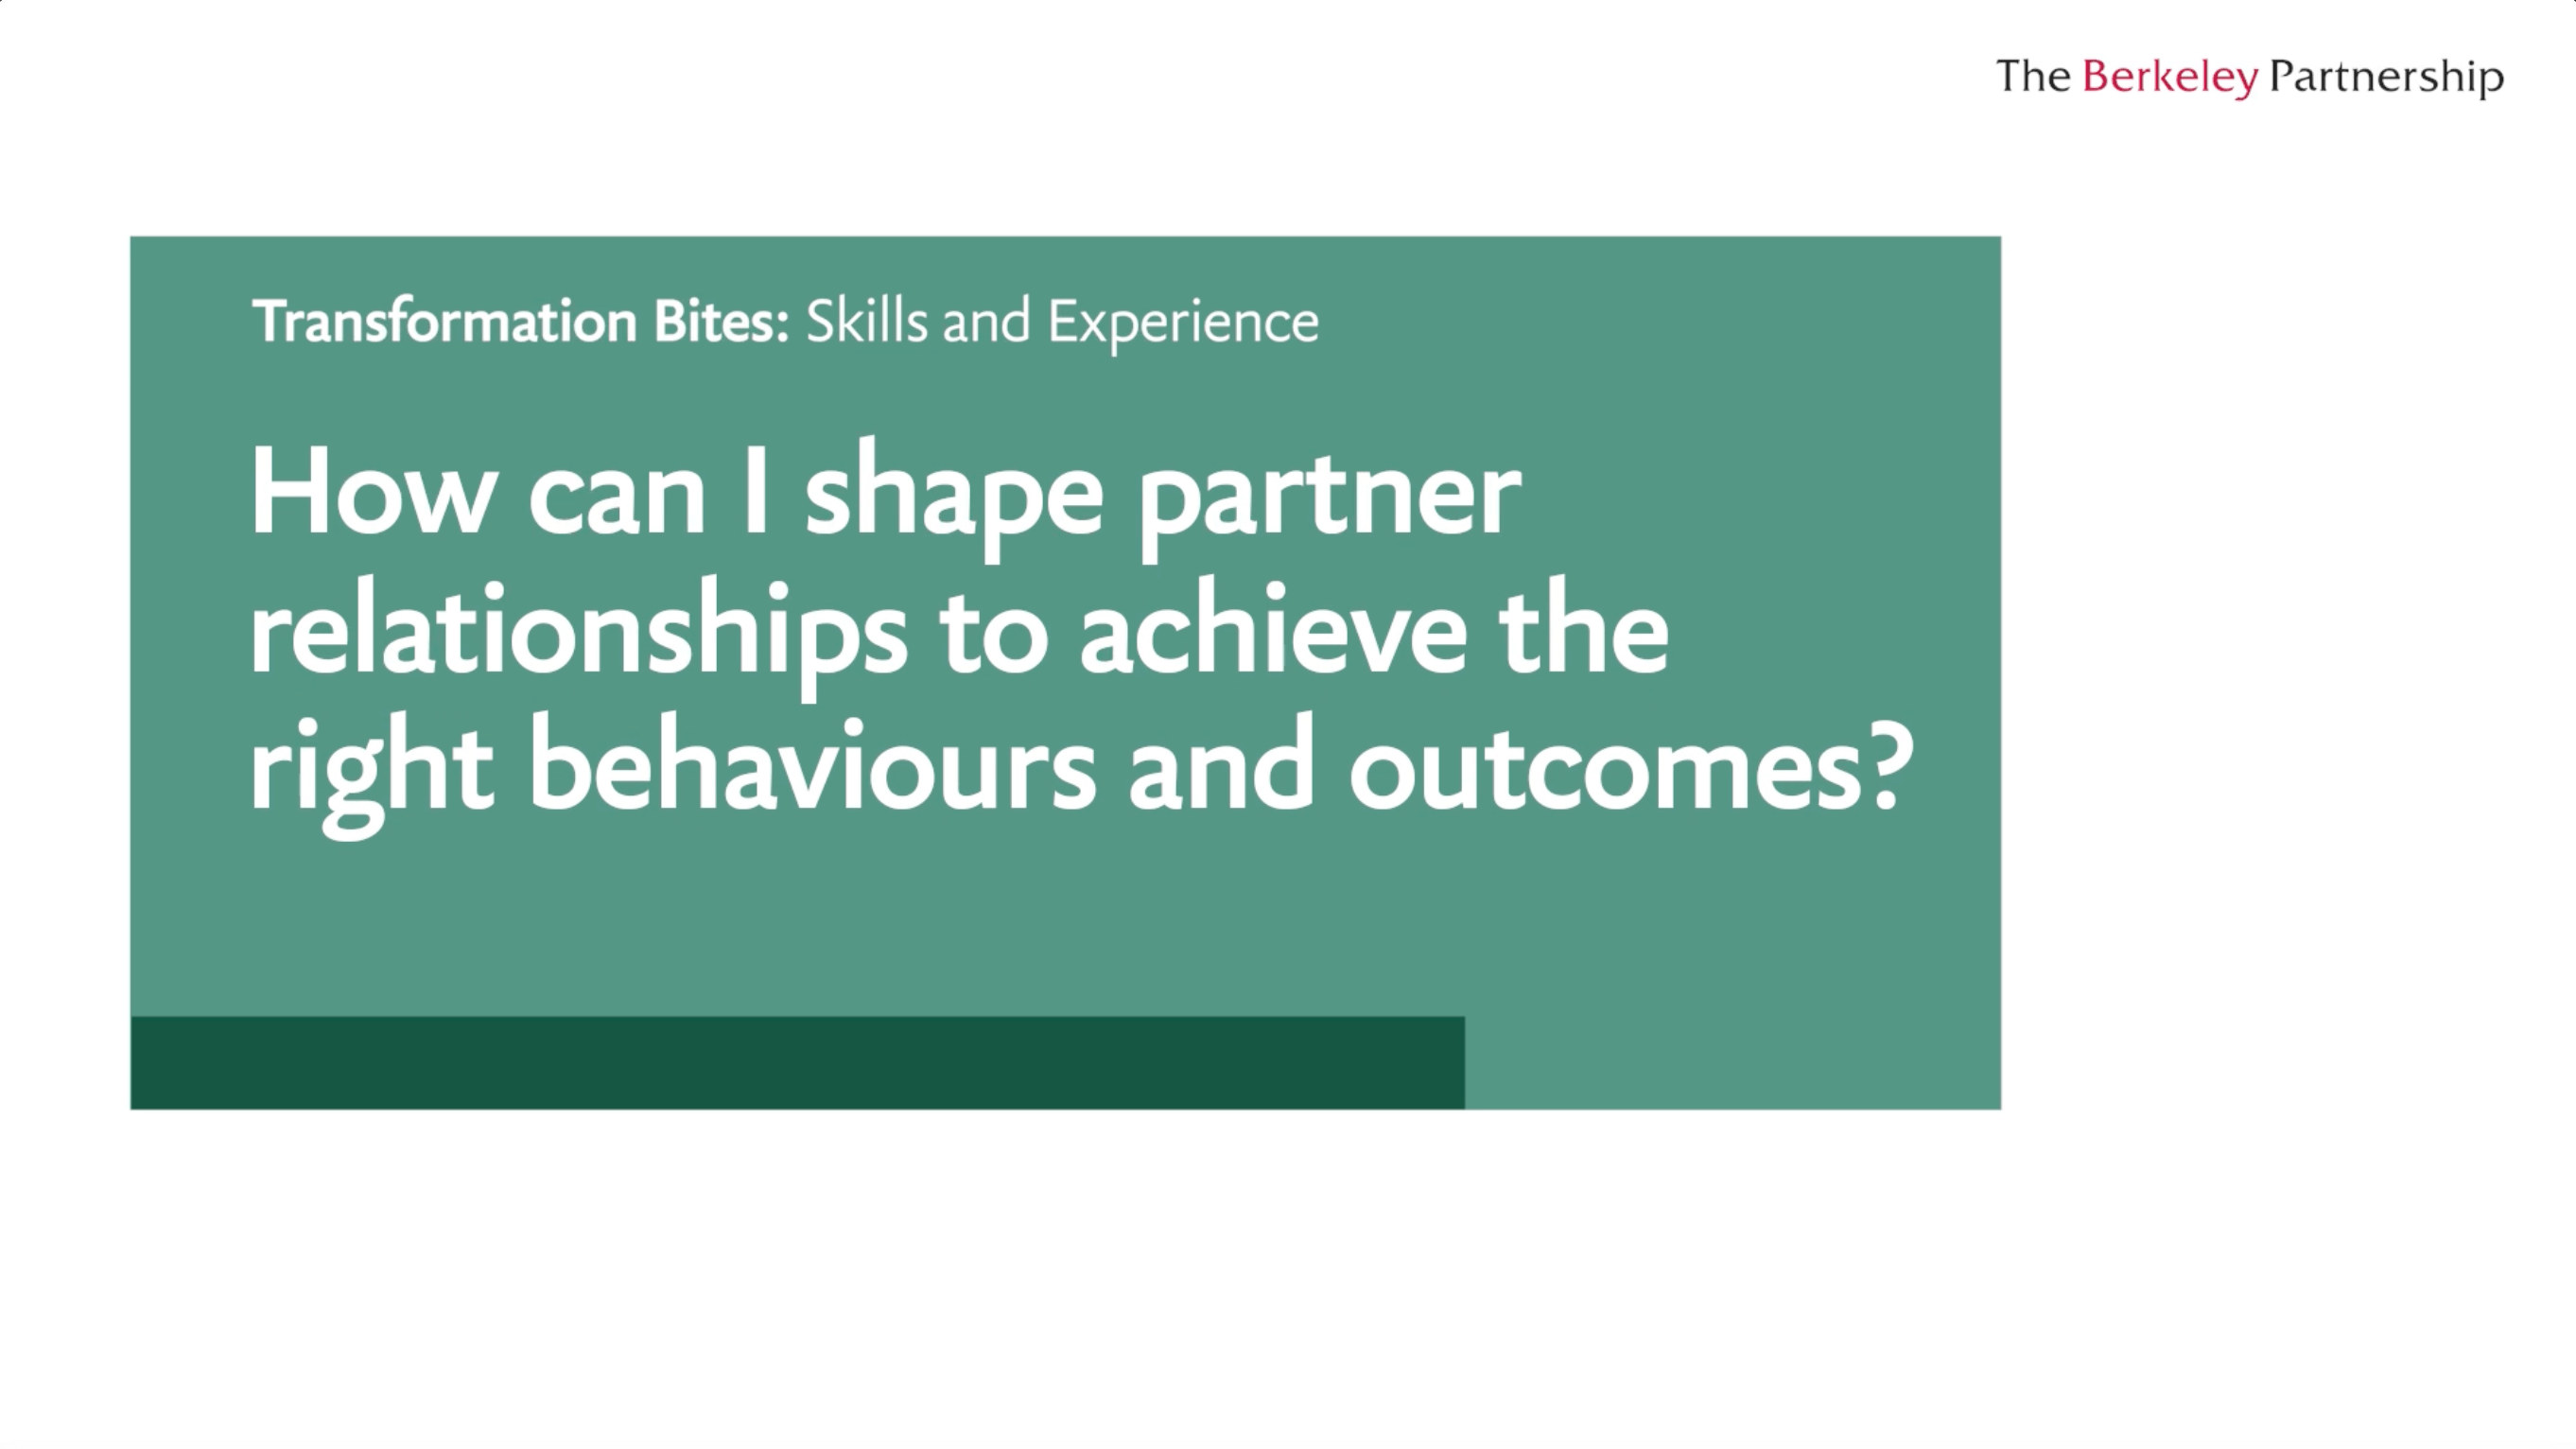 How can I shape partner relationships to encourage the right behaviours and outcomes?